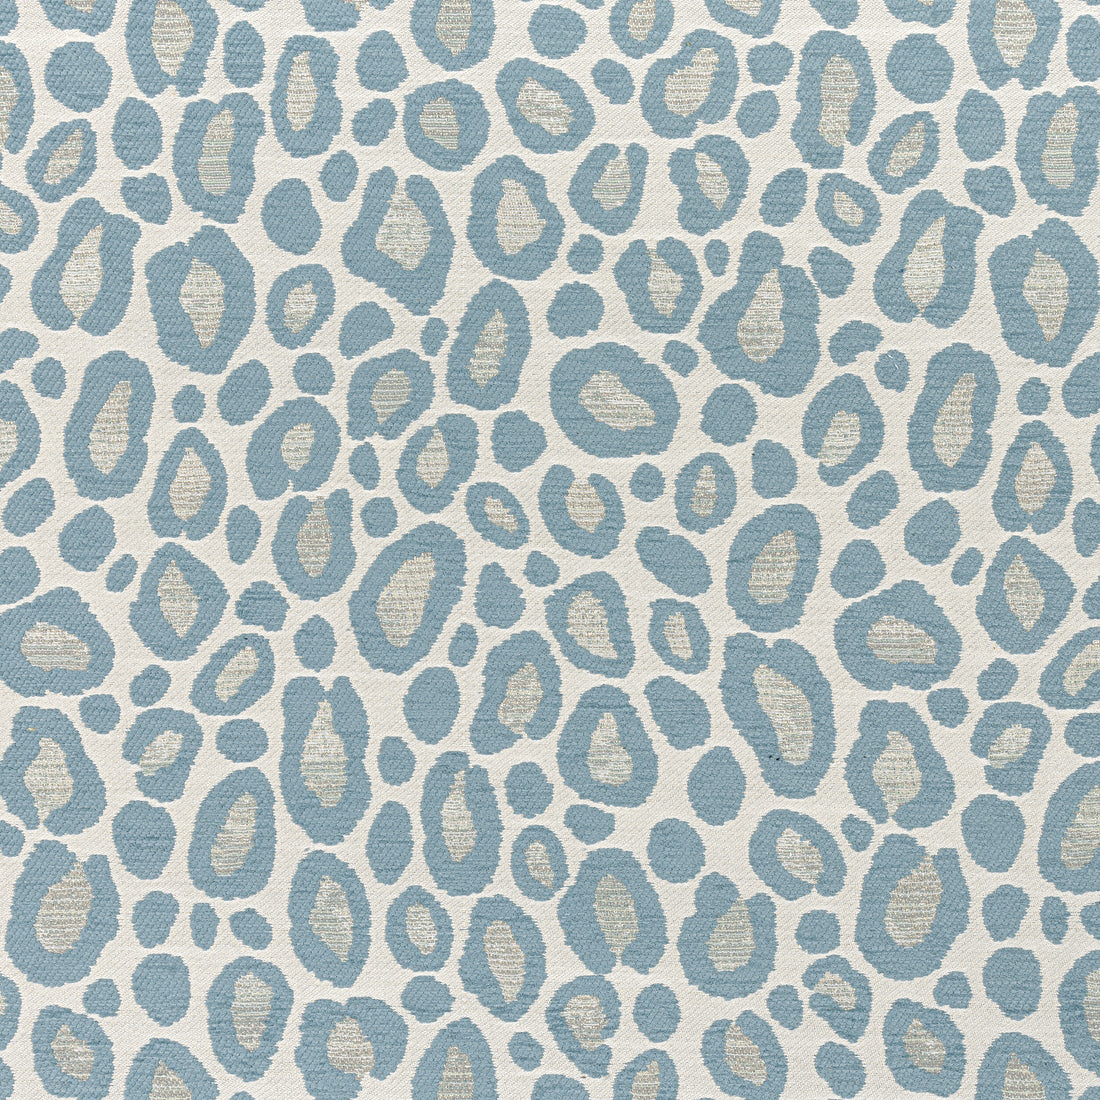 Kenzo fabric in heron color - pattern number W8830 - by Thibaut in the Haven collection